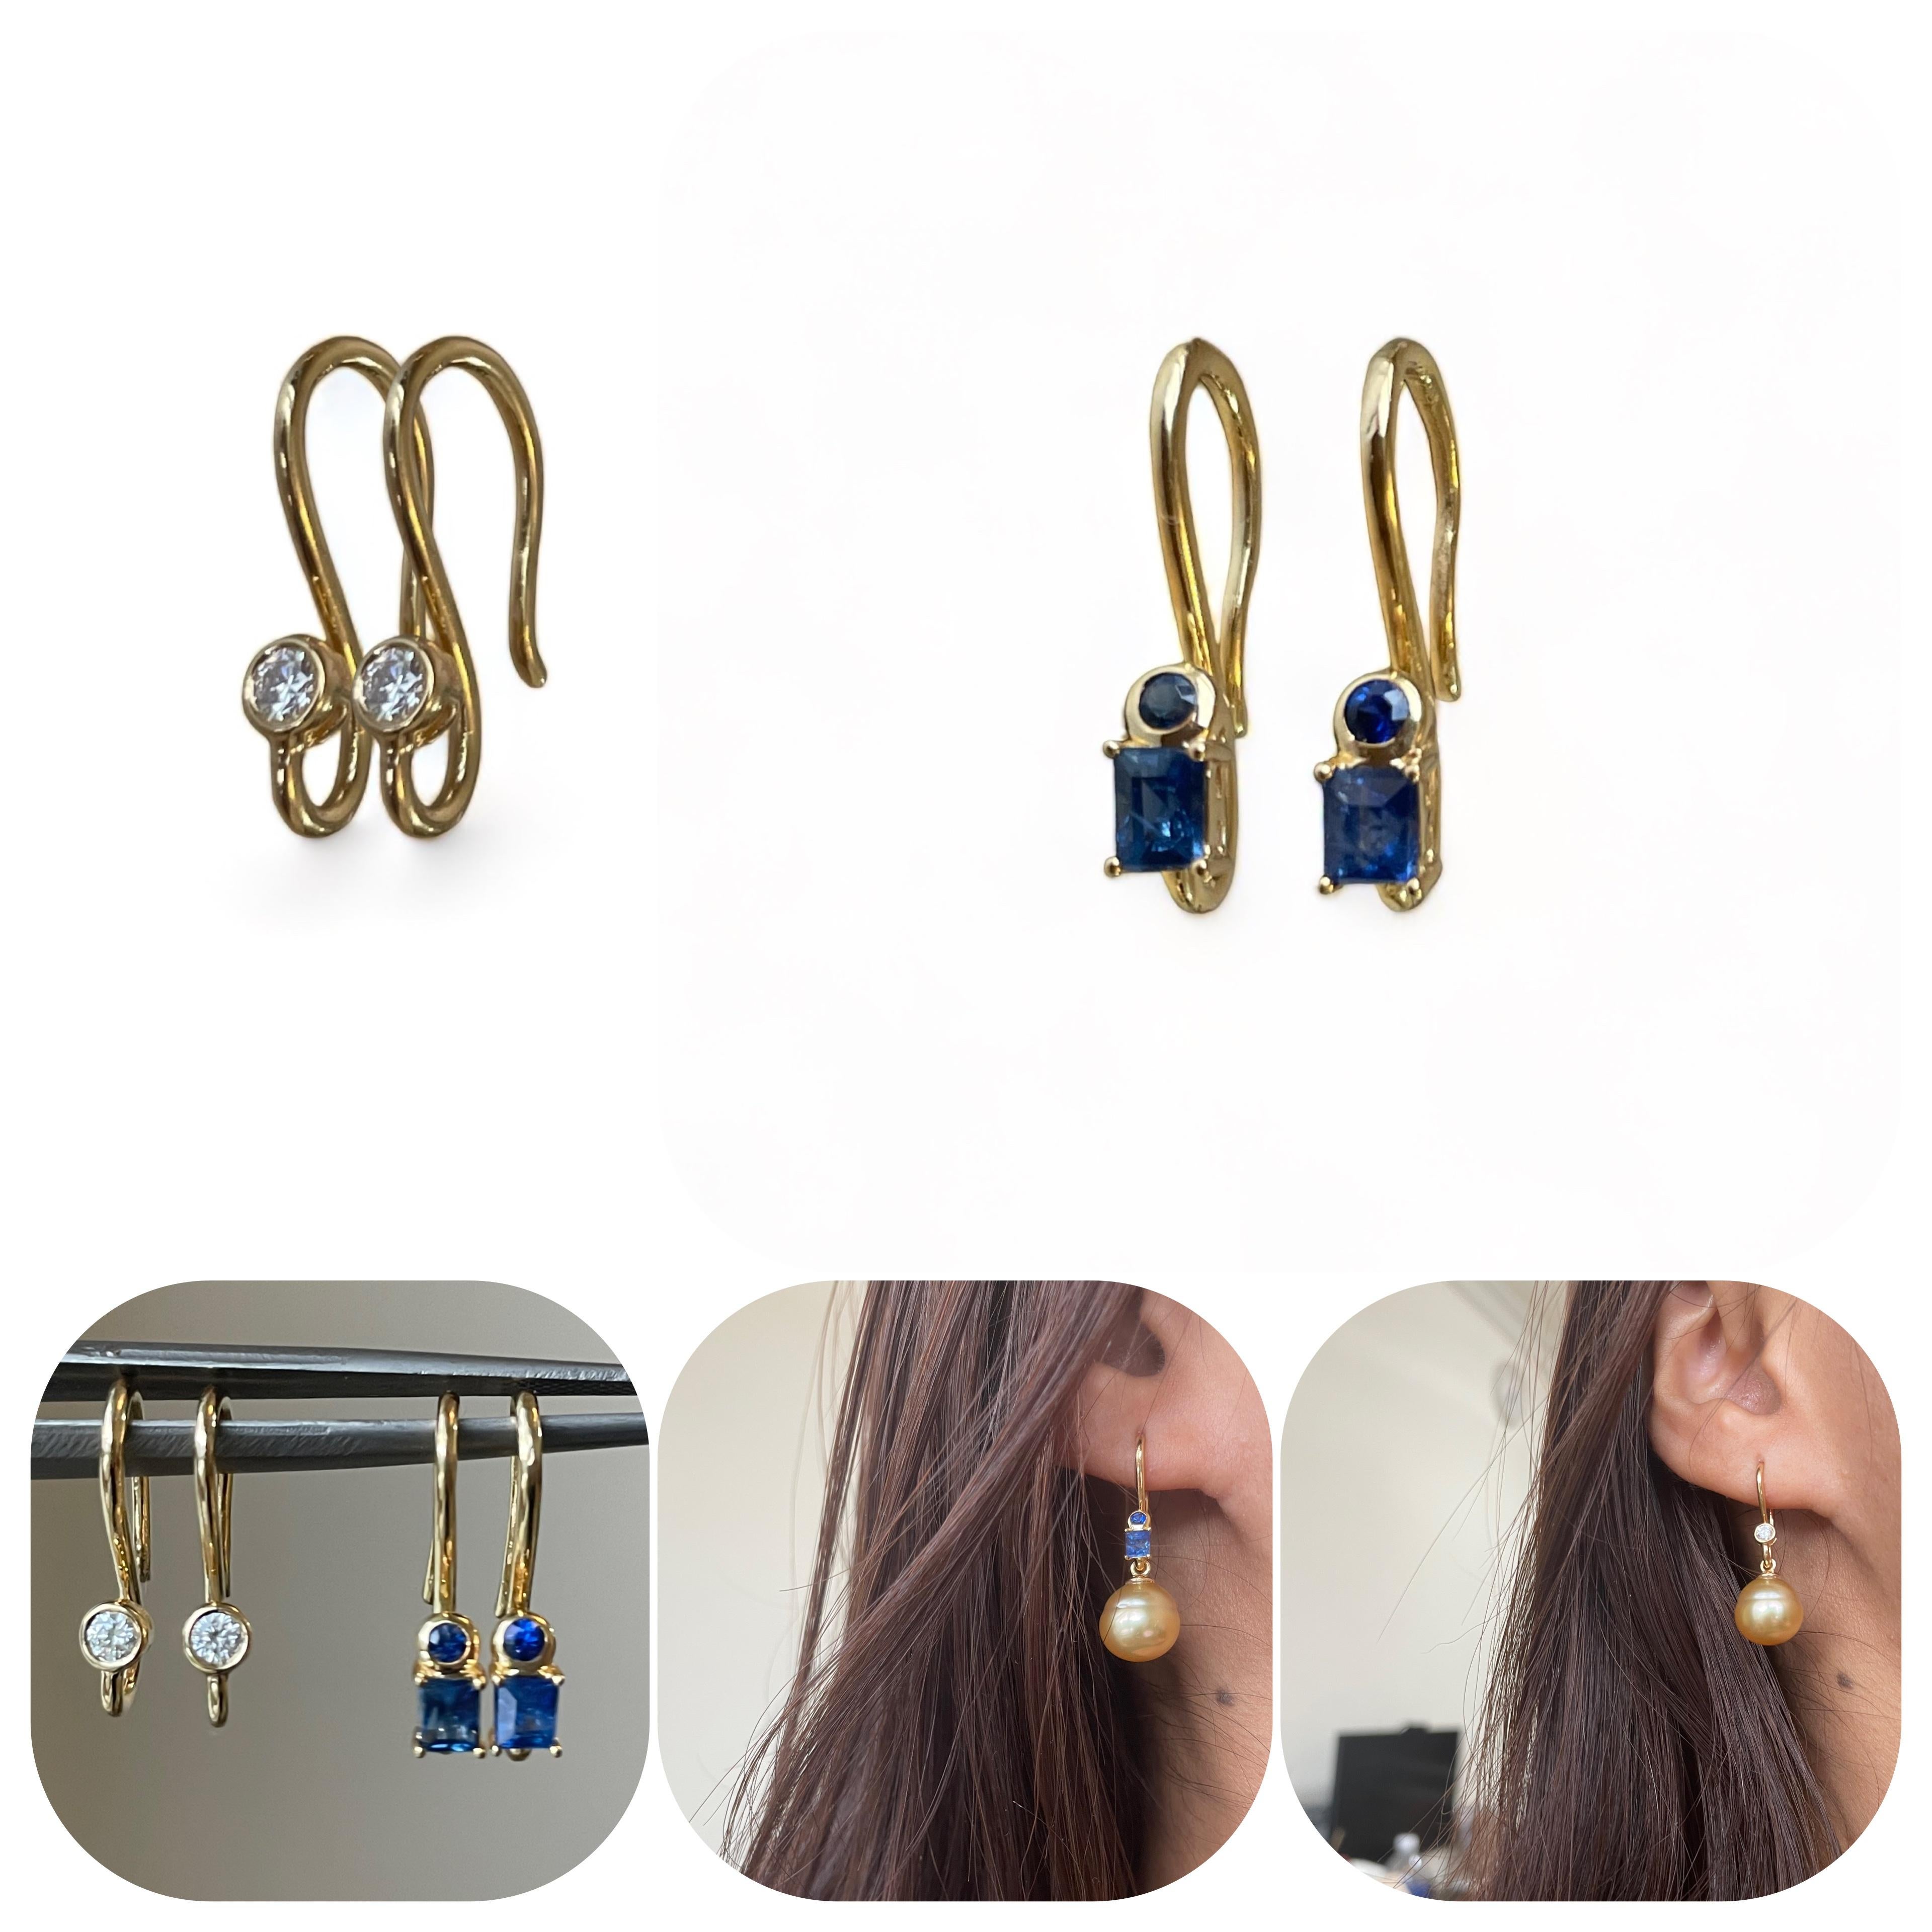 French wire earrings are a type of basic jewelry, particularly known for their dangling design featuring a curved hook that passes through the ear. The hook remains open at the back, allowing the earring to securely rest on the earlobe without the